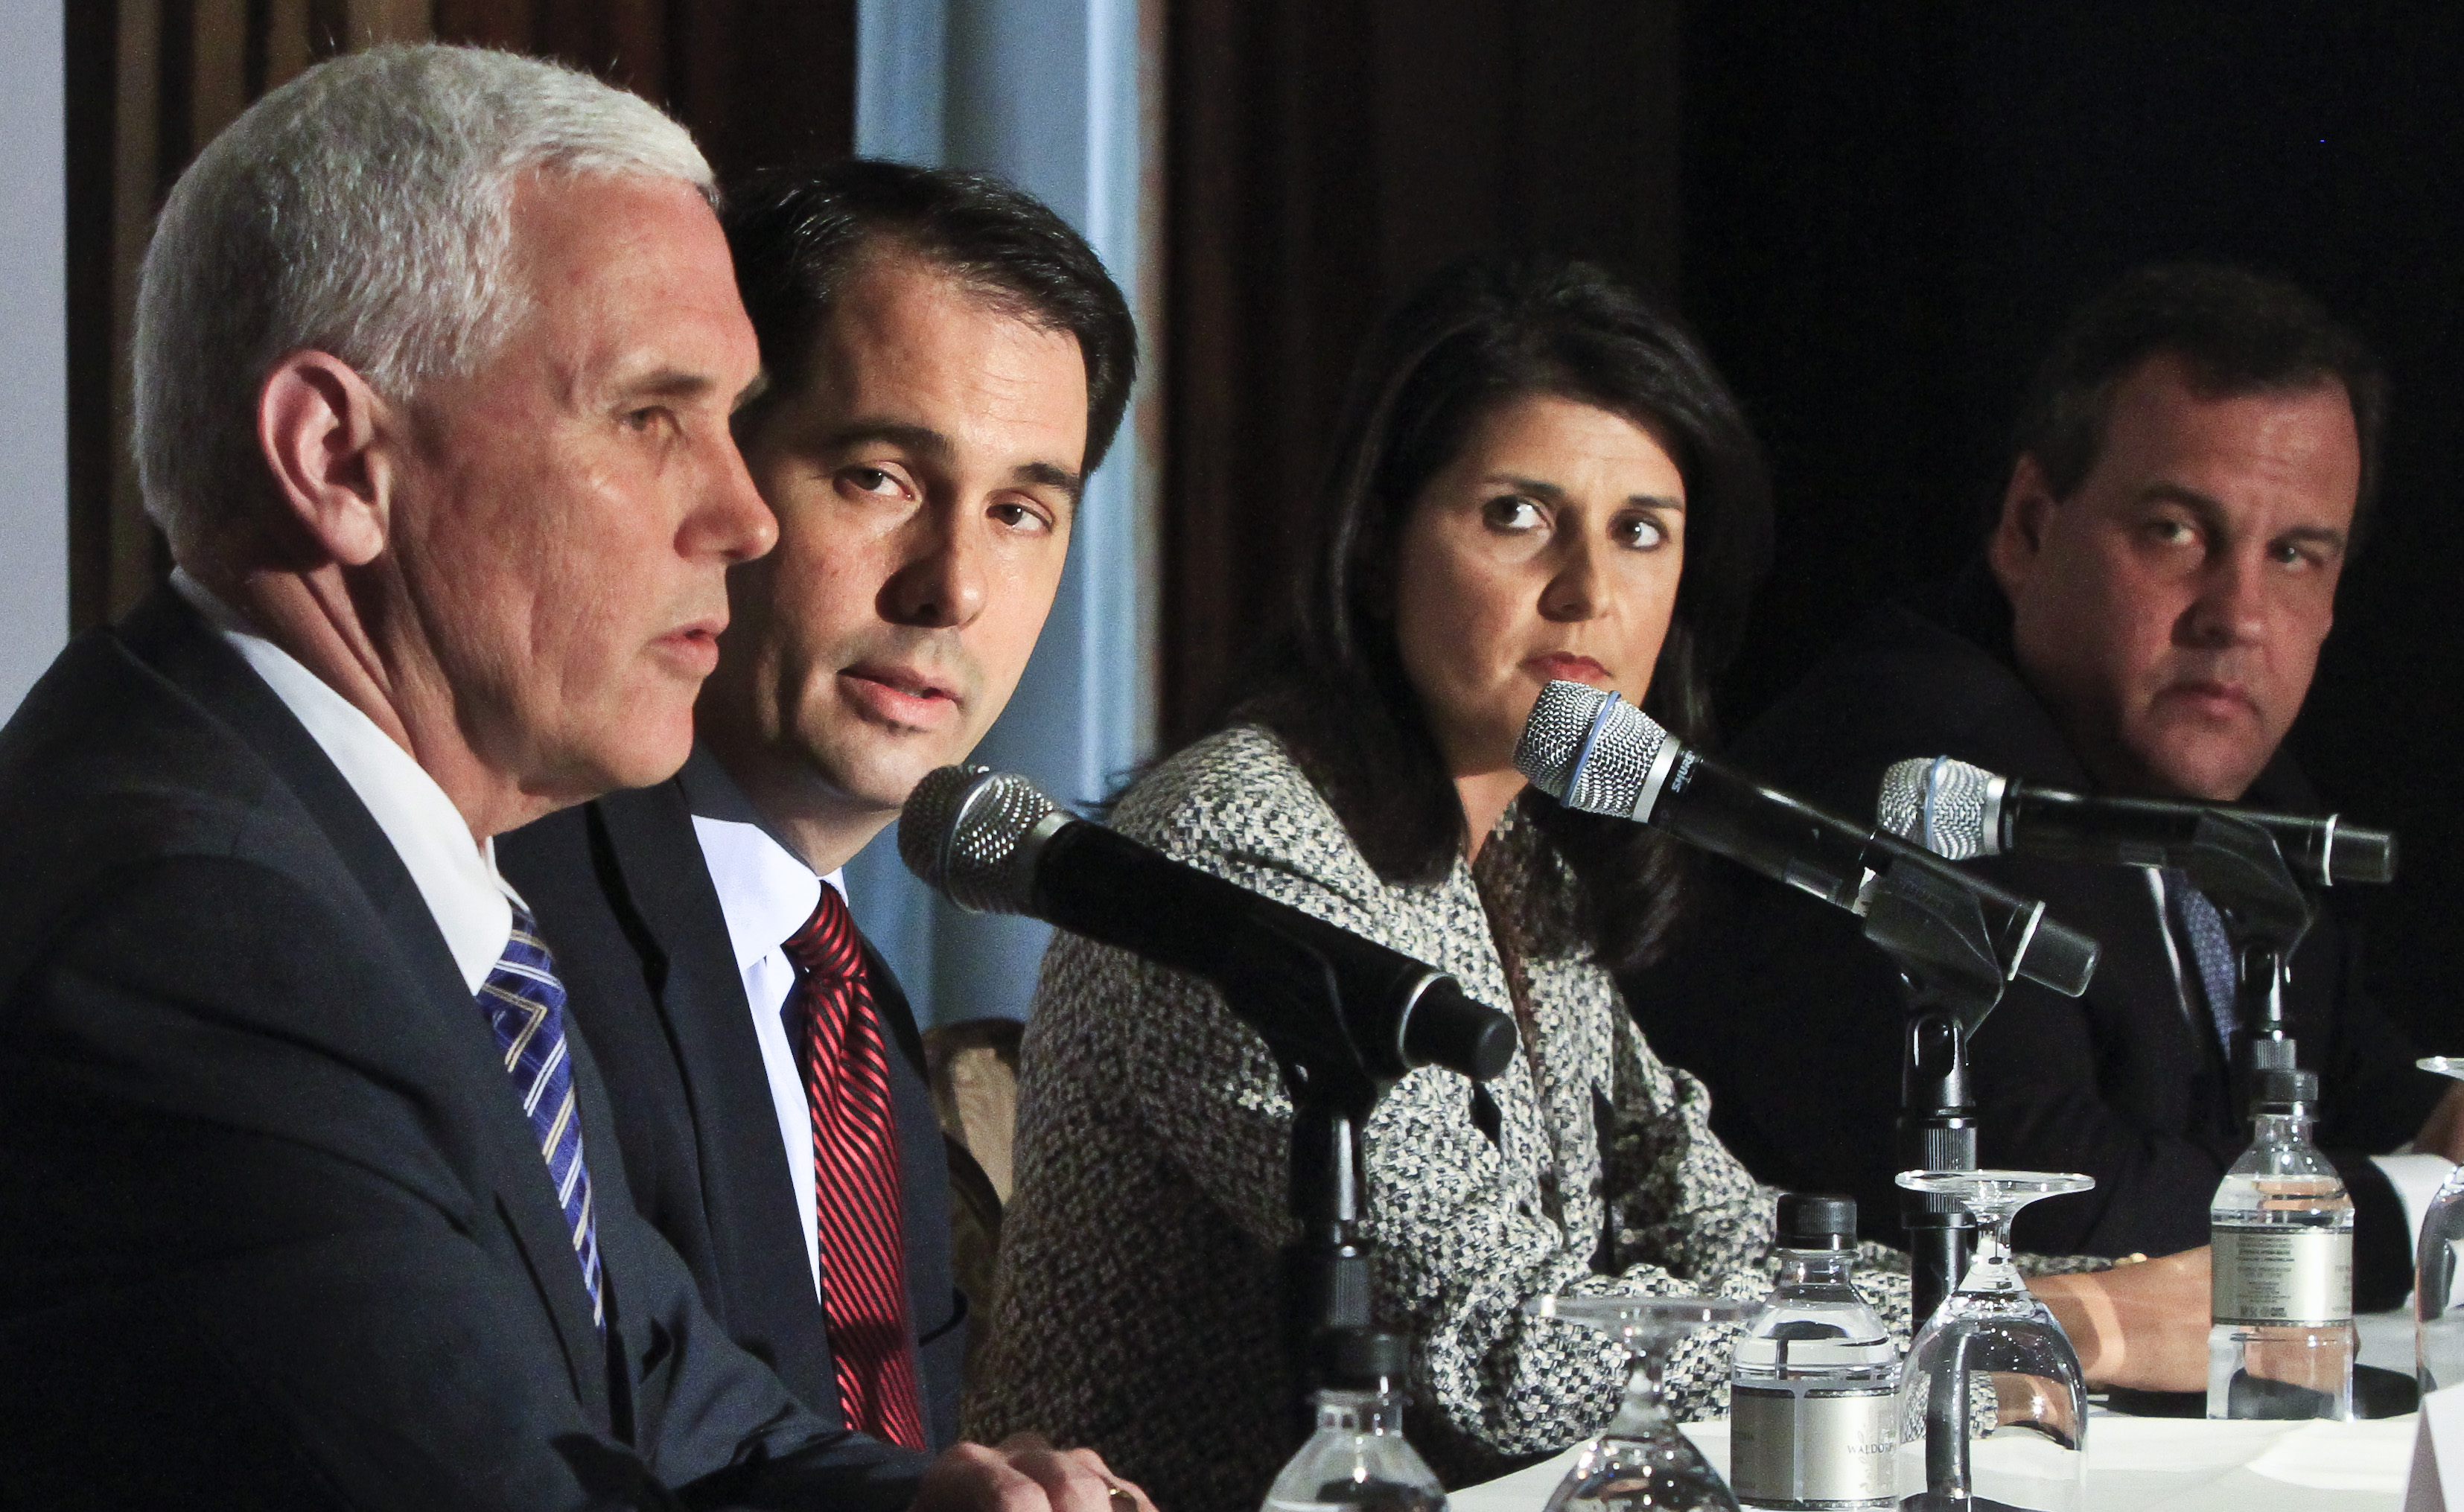 Wisconsin Gov. Scott Walker,  South Carolina Gov. Nikki R. Haley and New Jersey Gov. Chris Christie listen as Indiana Gov. Mike Pence speaks during a press conference at the Republican Governors Association's quarterly meeting on Wednesday May 21, 2014 in New York. (Bebeto Matthews—AP)